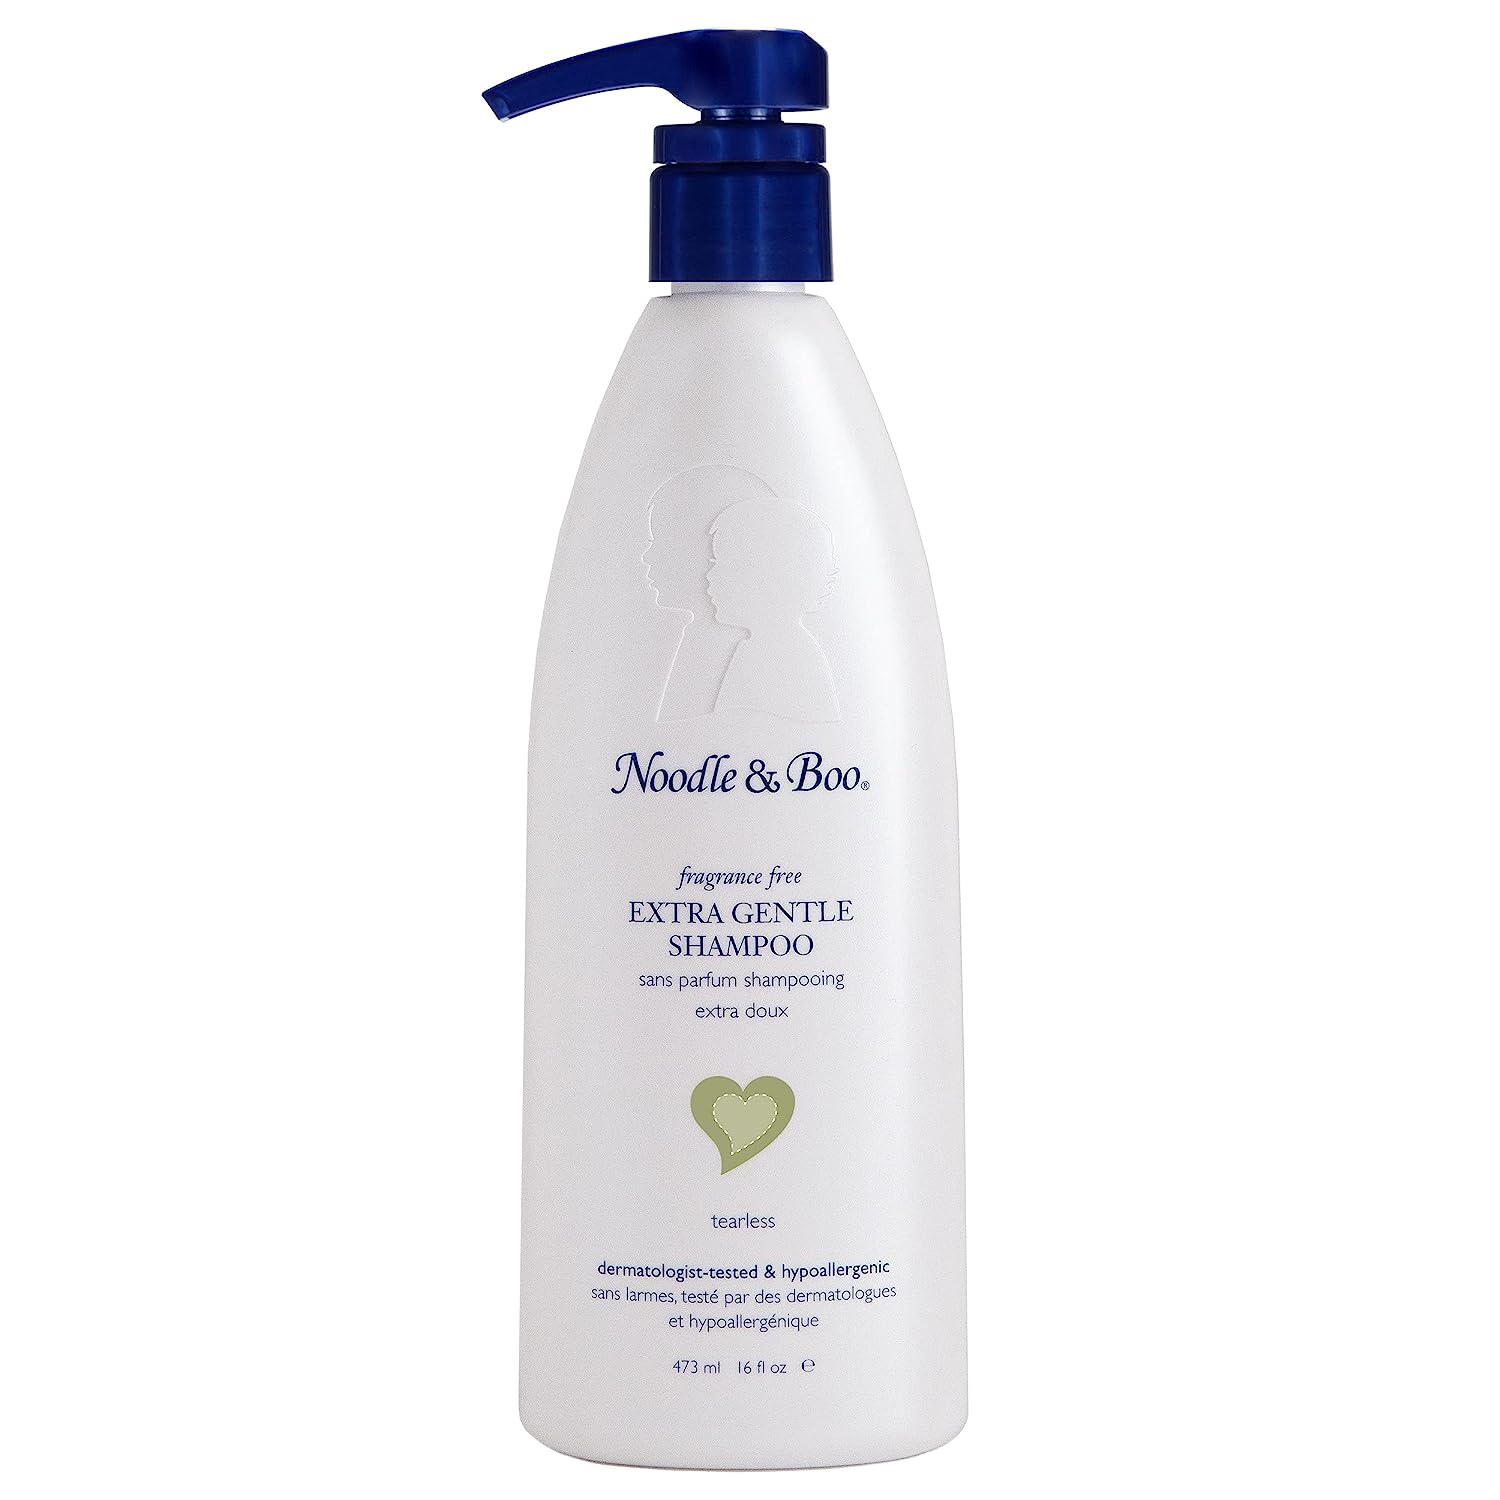 Noodle & Boo Fragrance Free Extra Gentle Shampoo for [...]